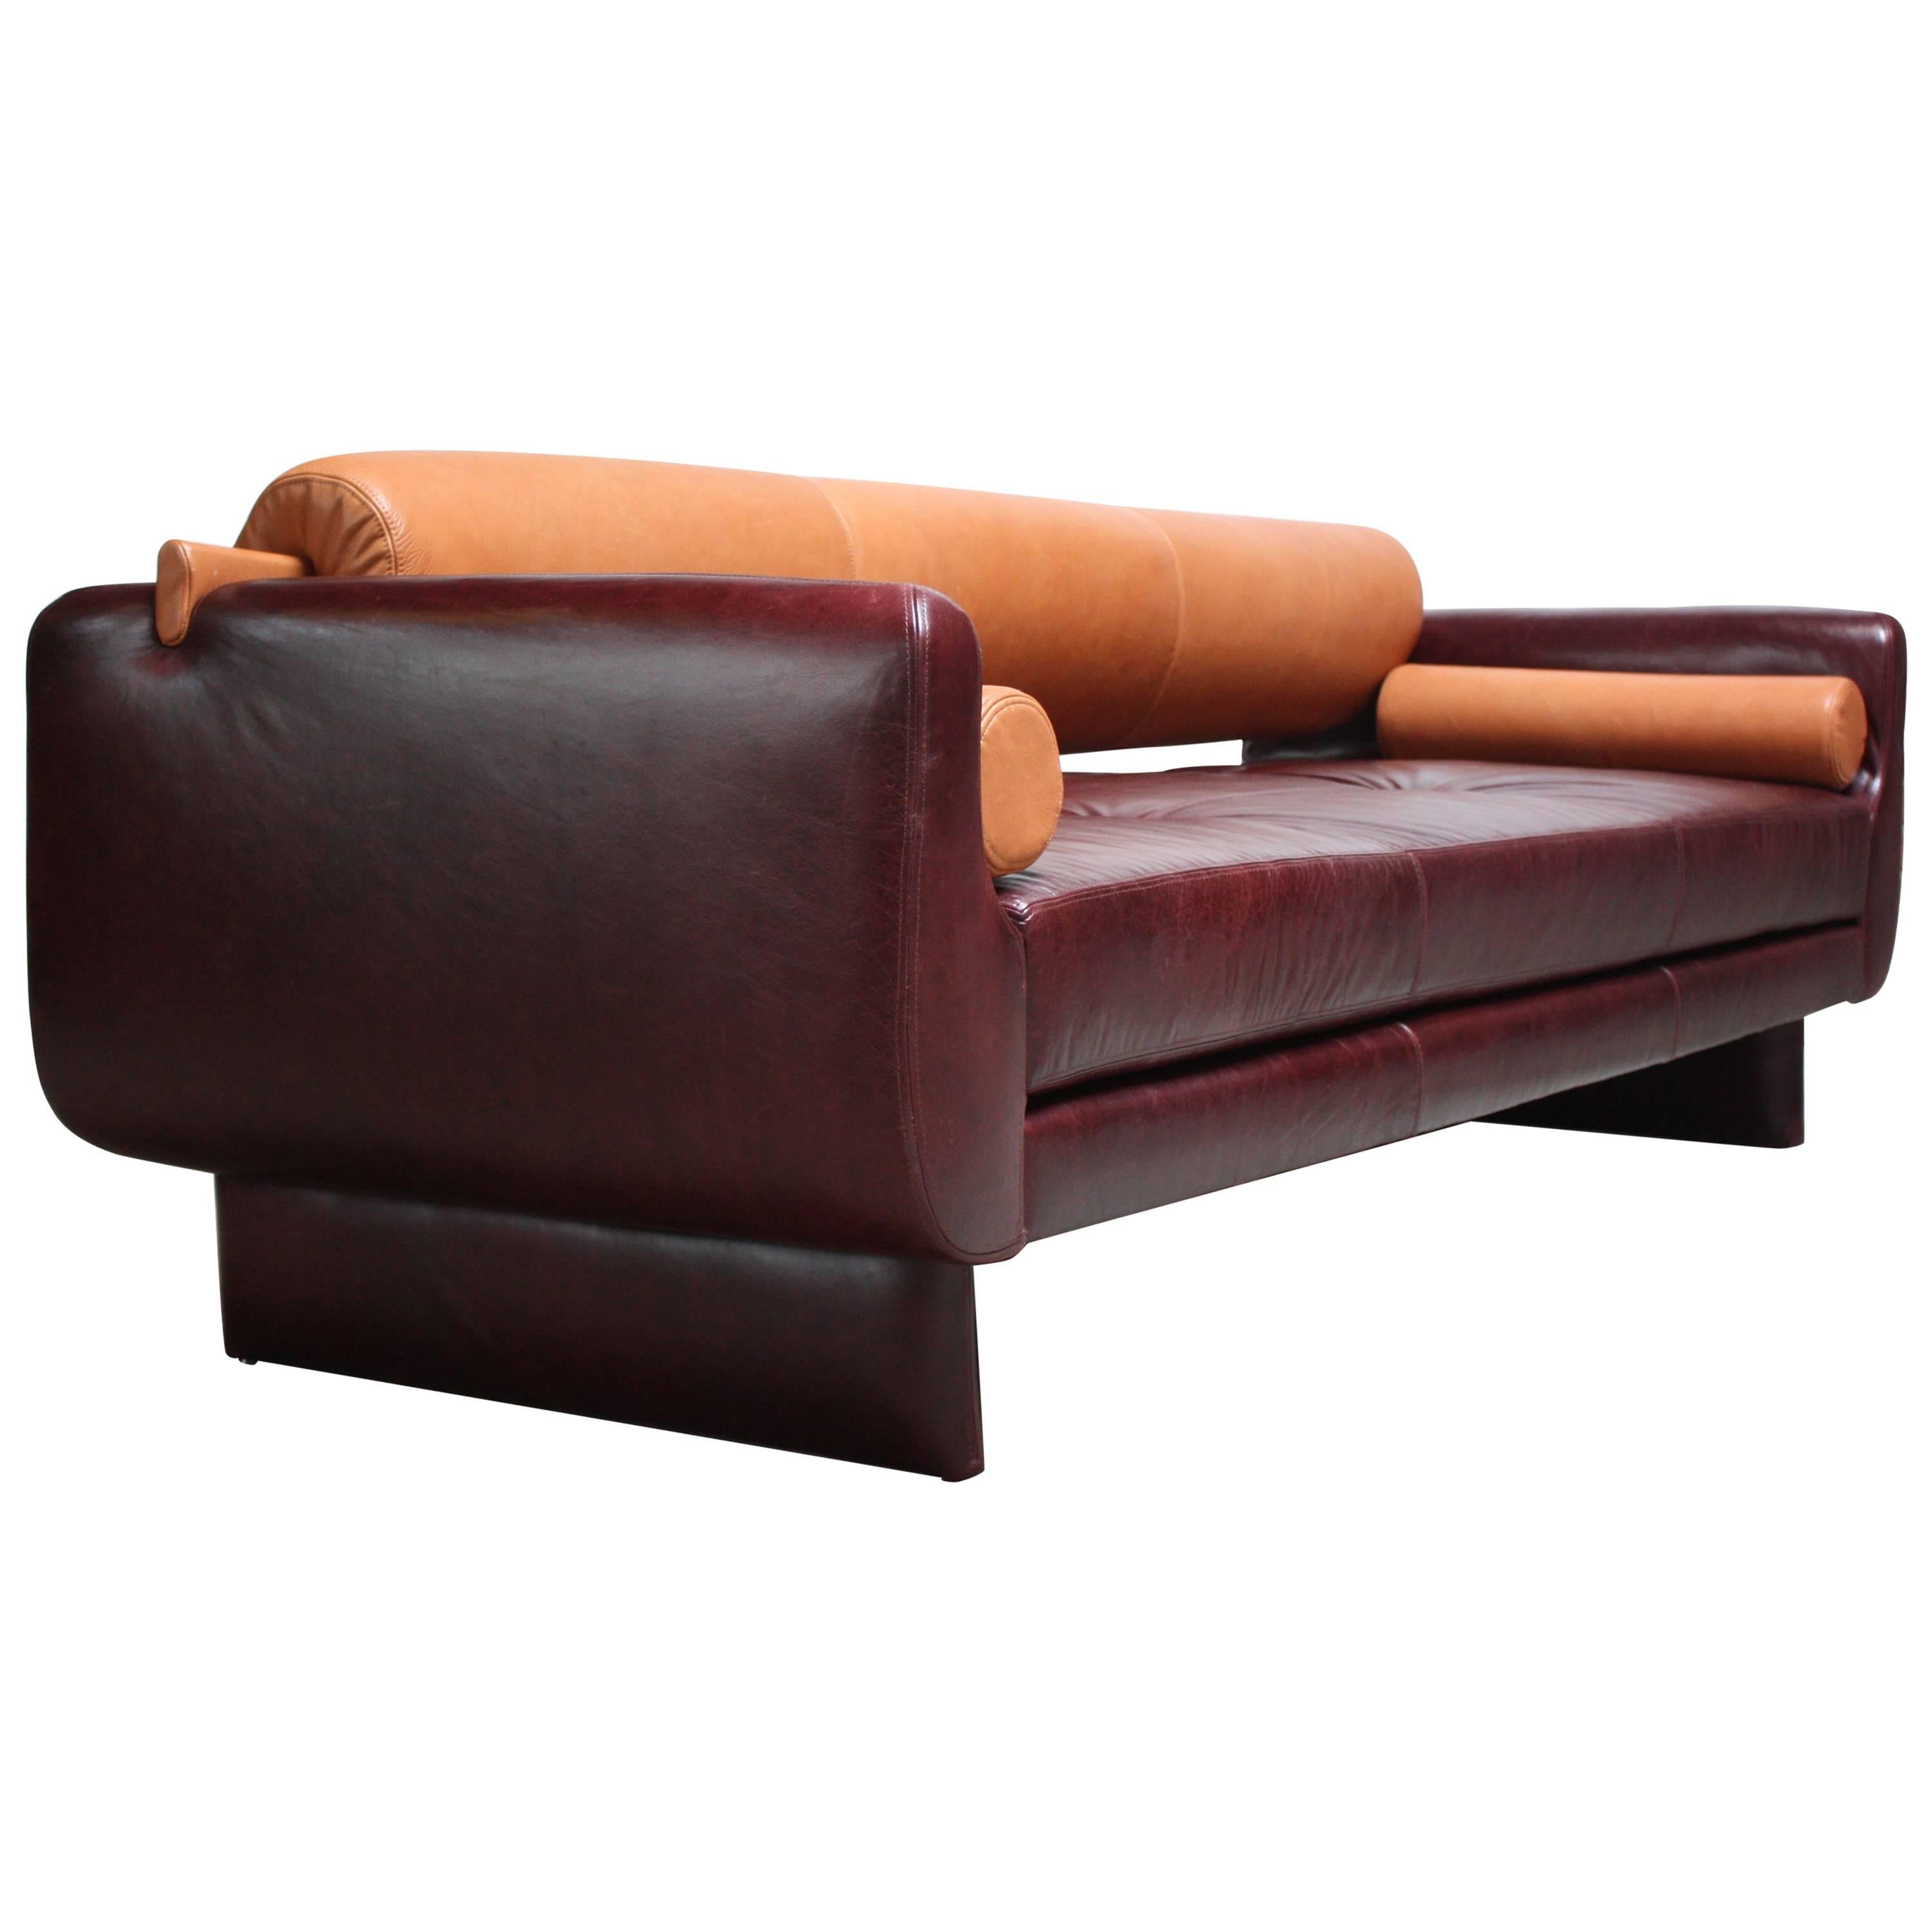 Vladimir Kagan 'Matinee' Sofa / Daybed in Leather